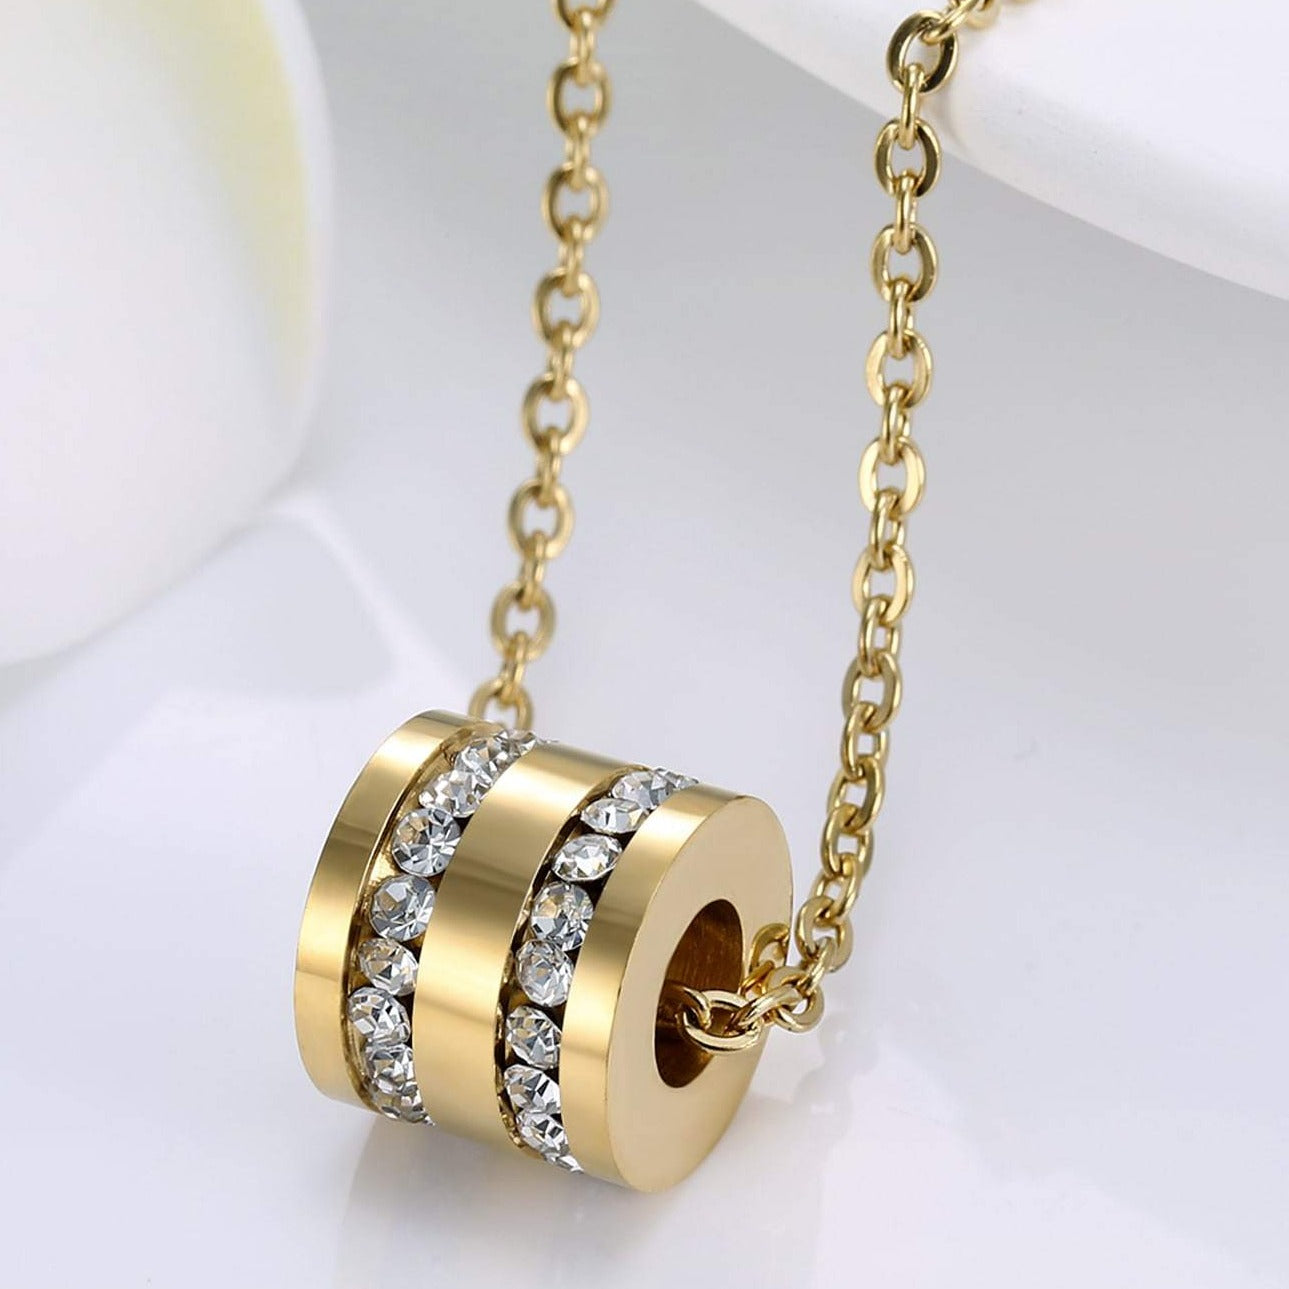 Drum shaped Necklace with Diamond Studding